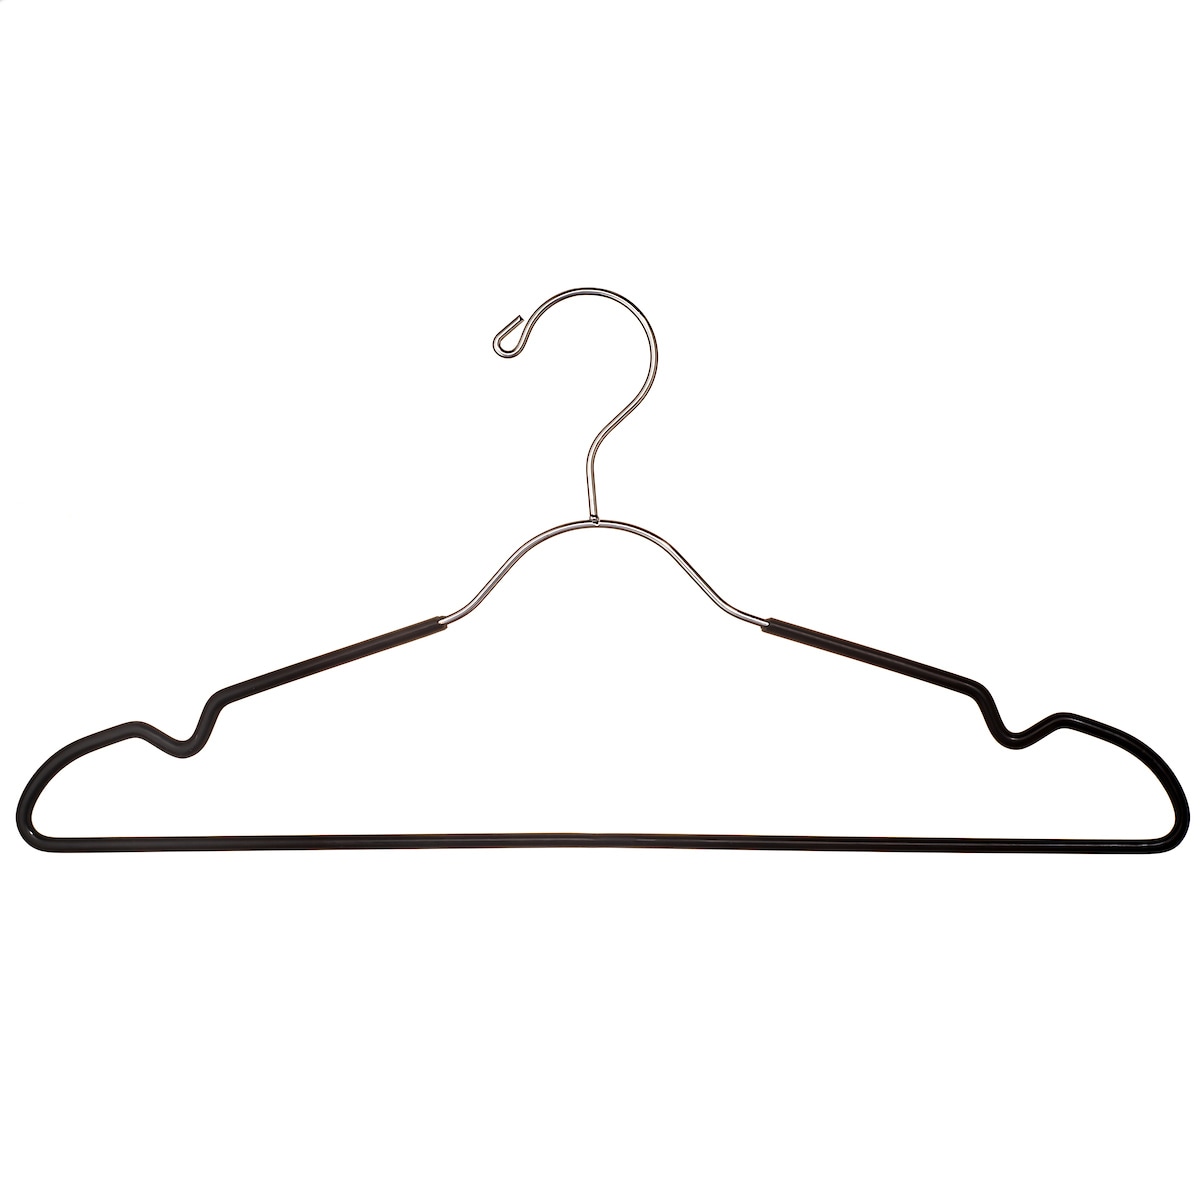 Metal Hangers - Metal Hanger - Chrome Hanger - Chrome Hangers -  Salespersons Hangers - Hangers - 14 Polished Chrome Hanger with Notches